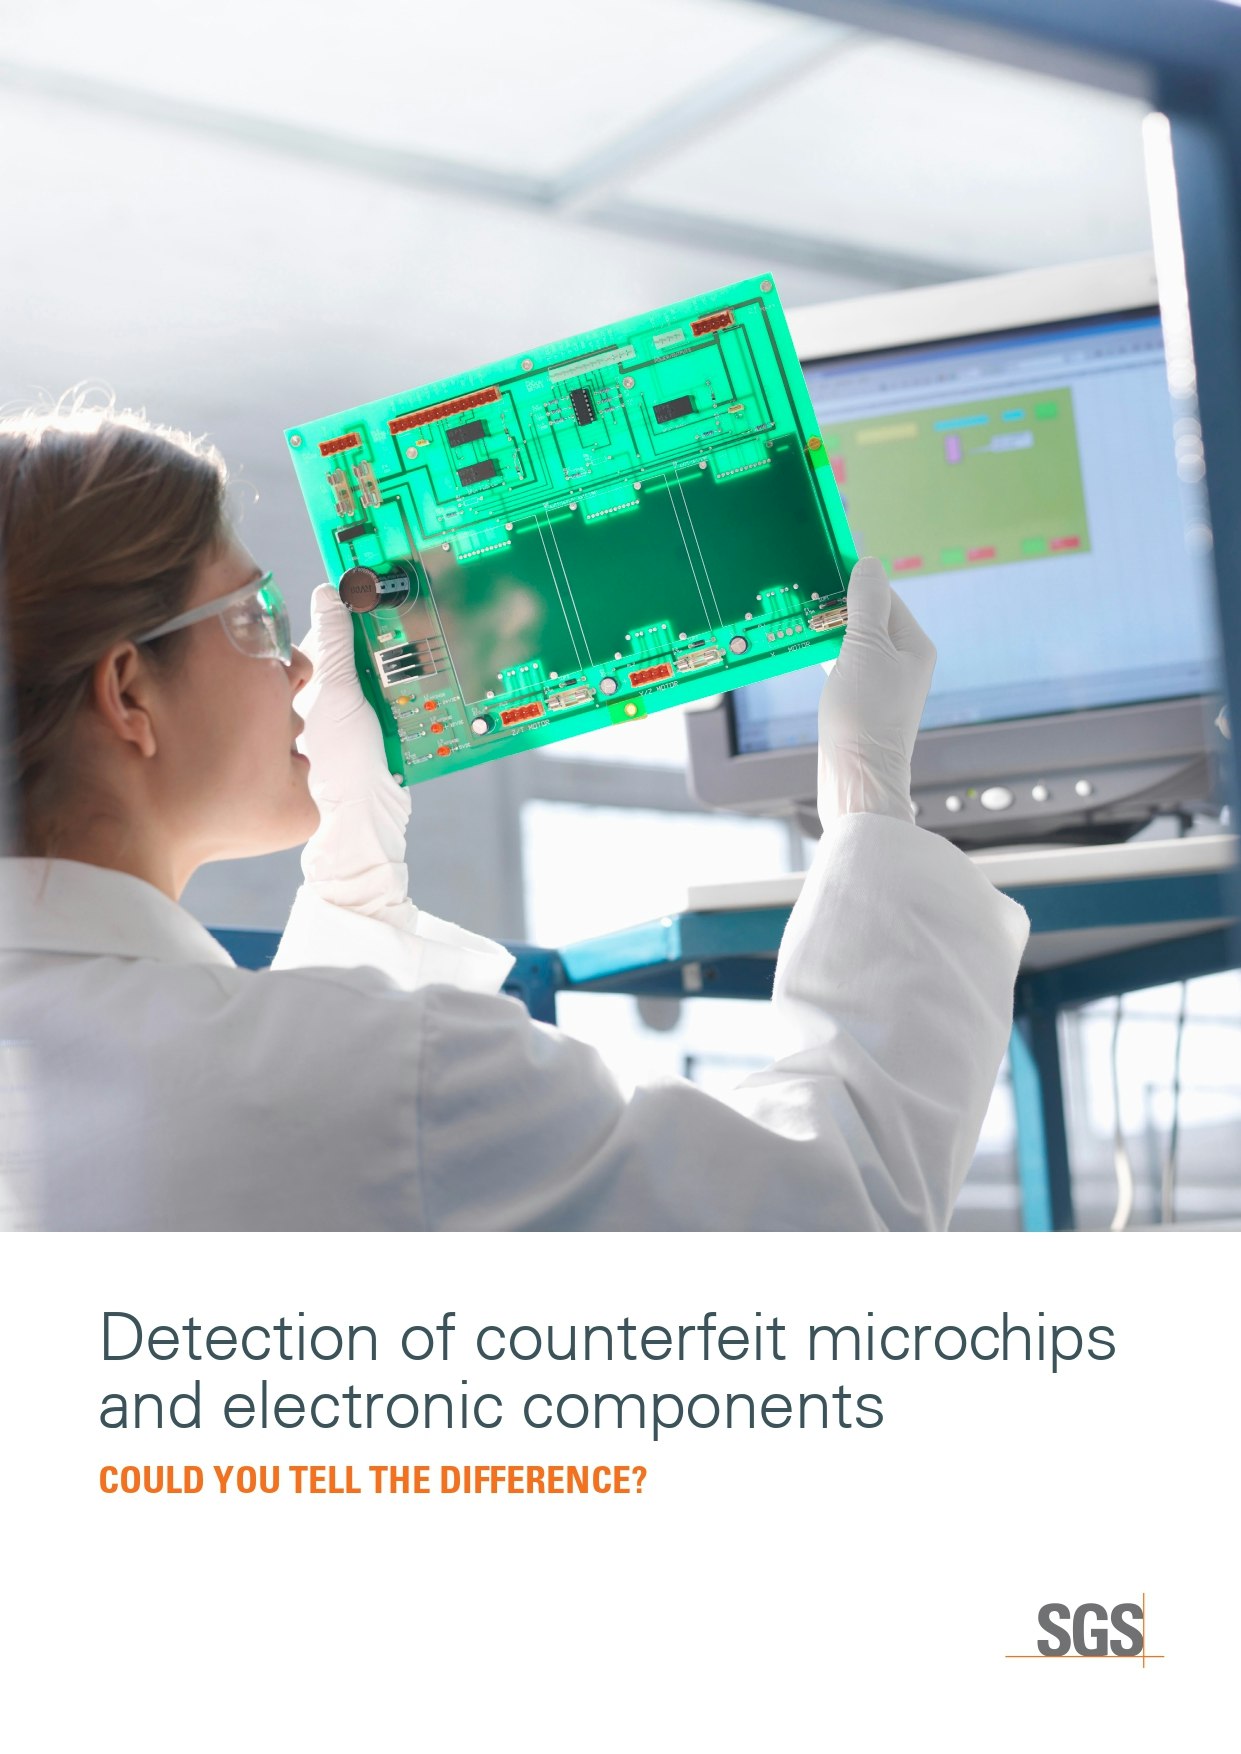 Detection of Counterfeit Microchips and Electronic Components